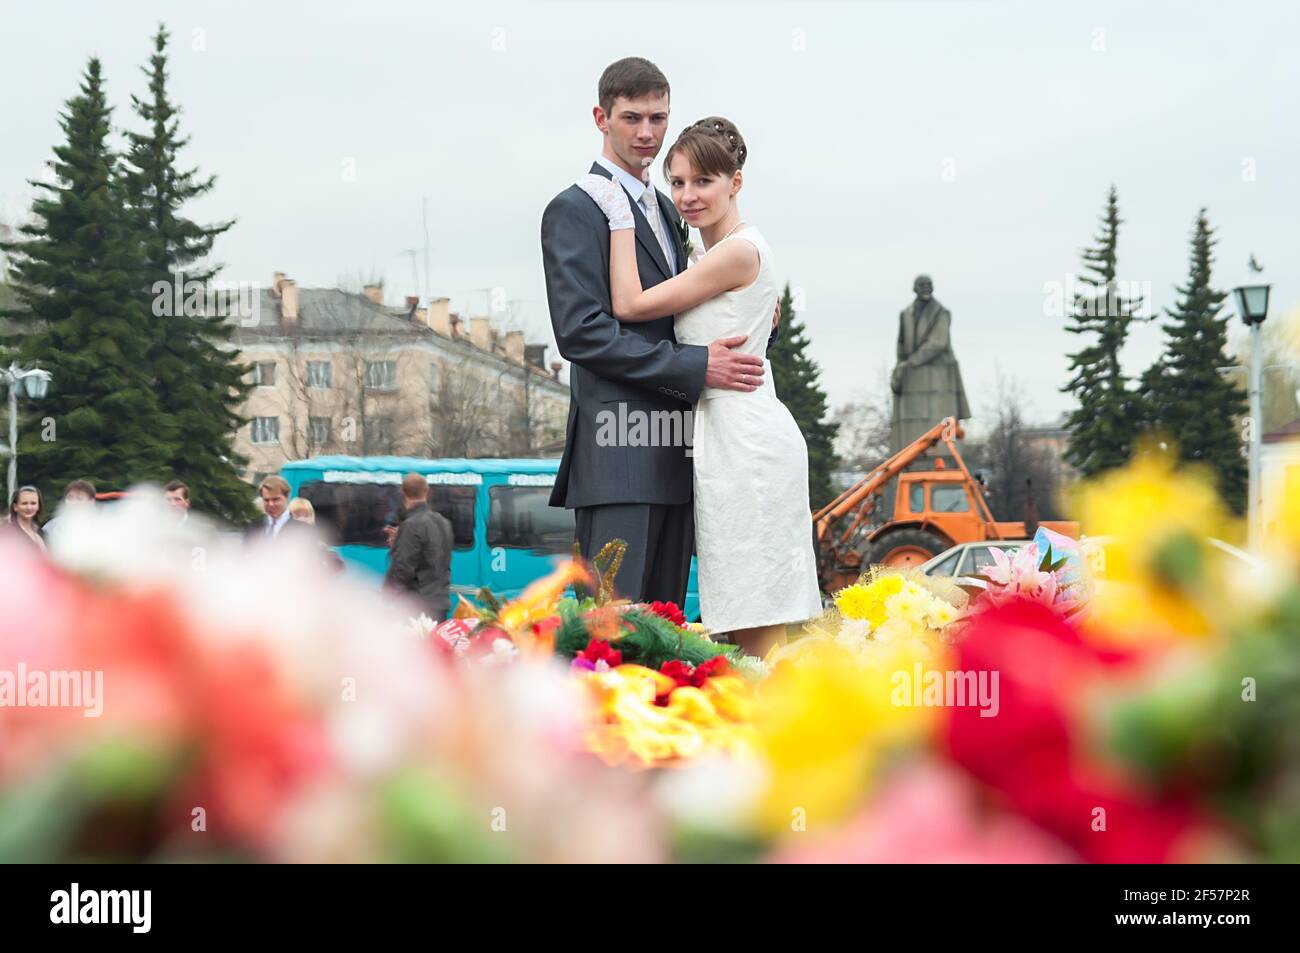 Russian bride and groom standing and embracing near memorial with eternal fire and flowers in a city center. Petrozavodsk, Russia Stock Photo